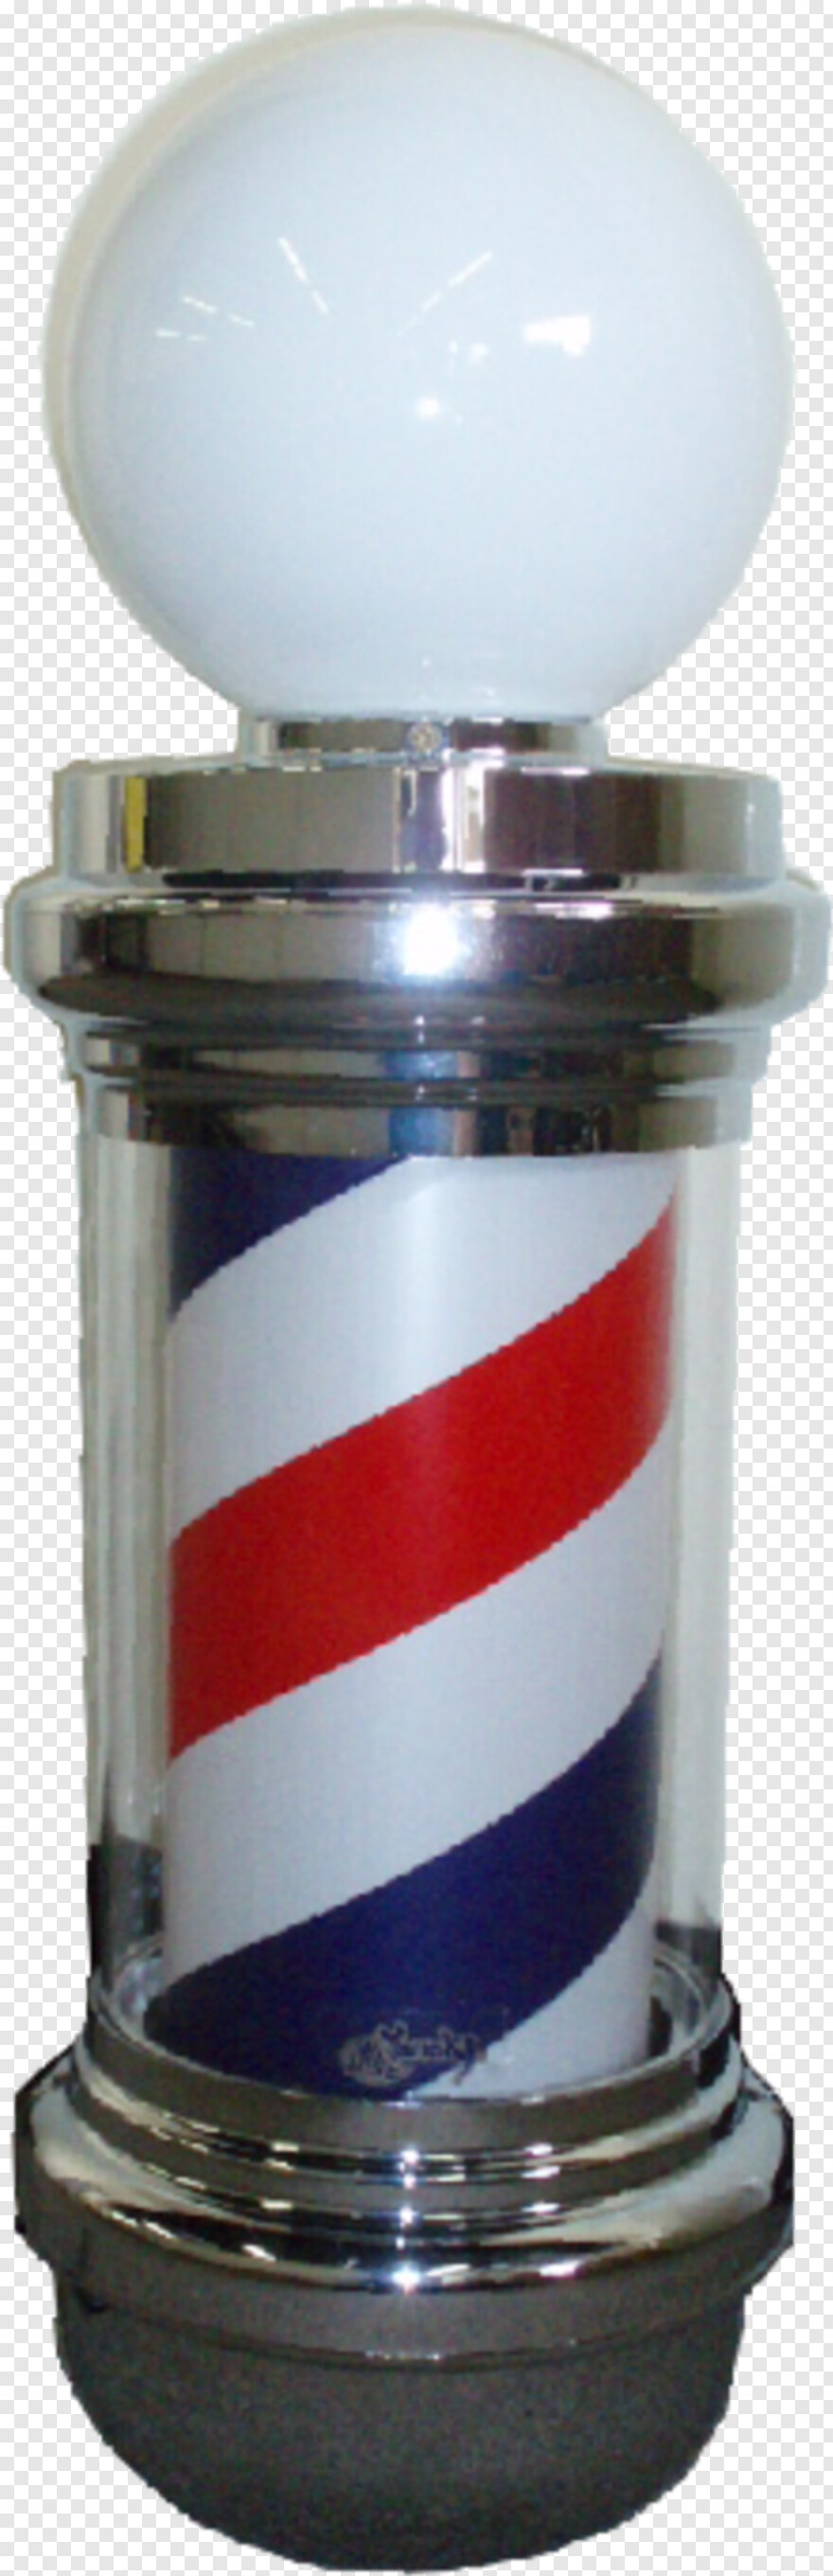 barber-clippers # 404103